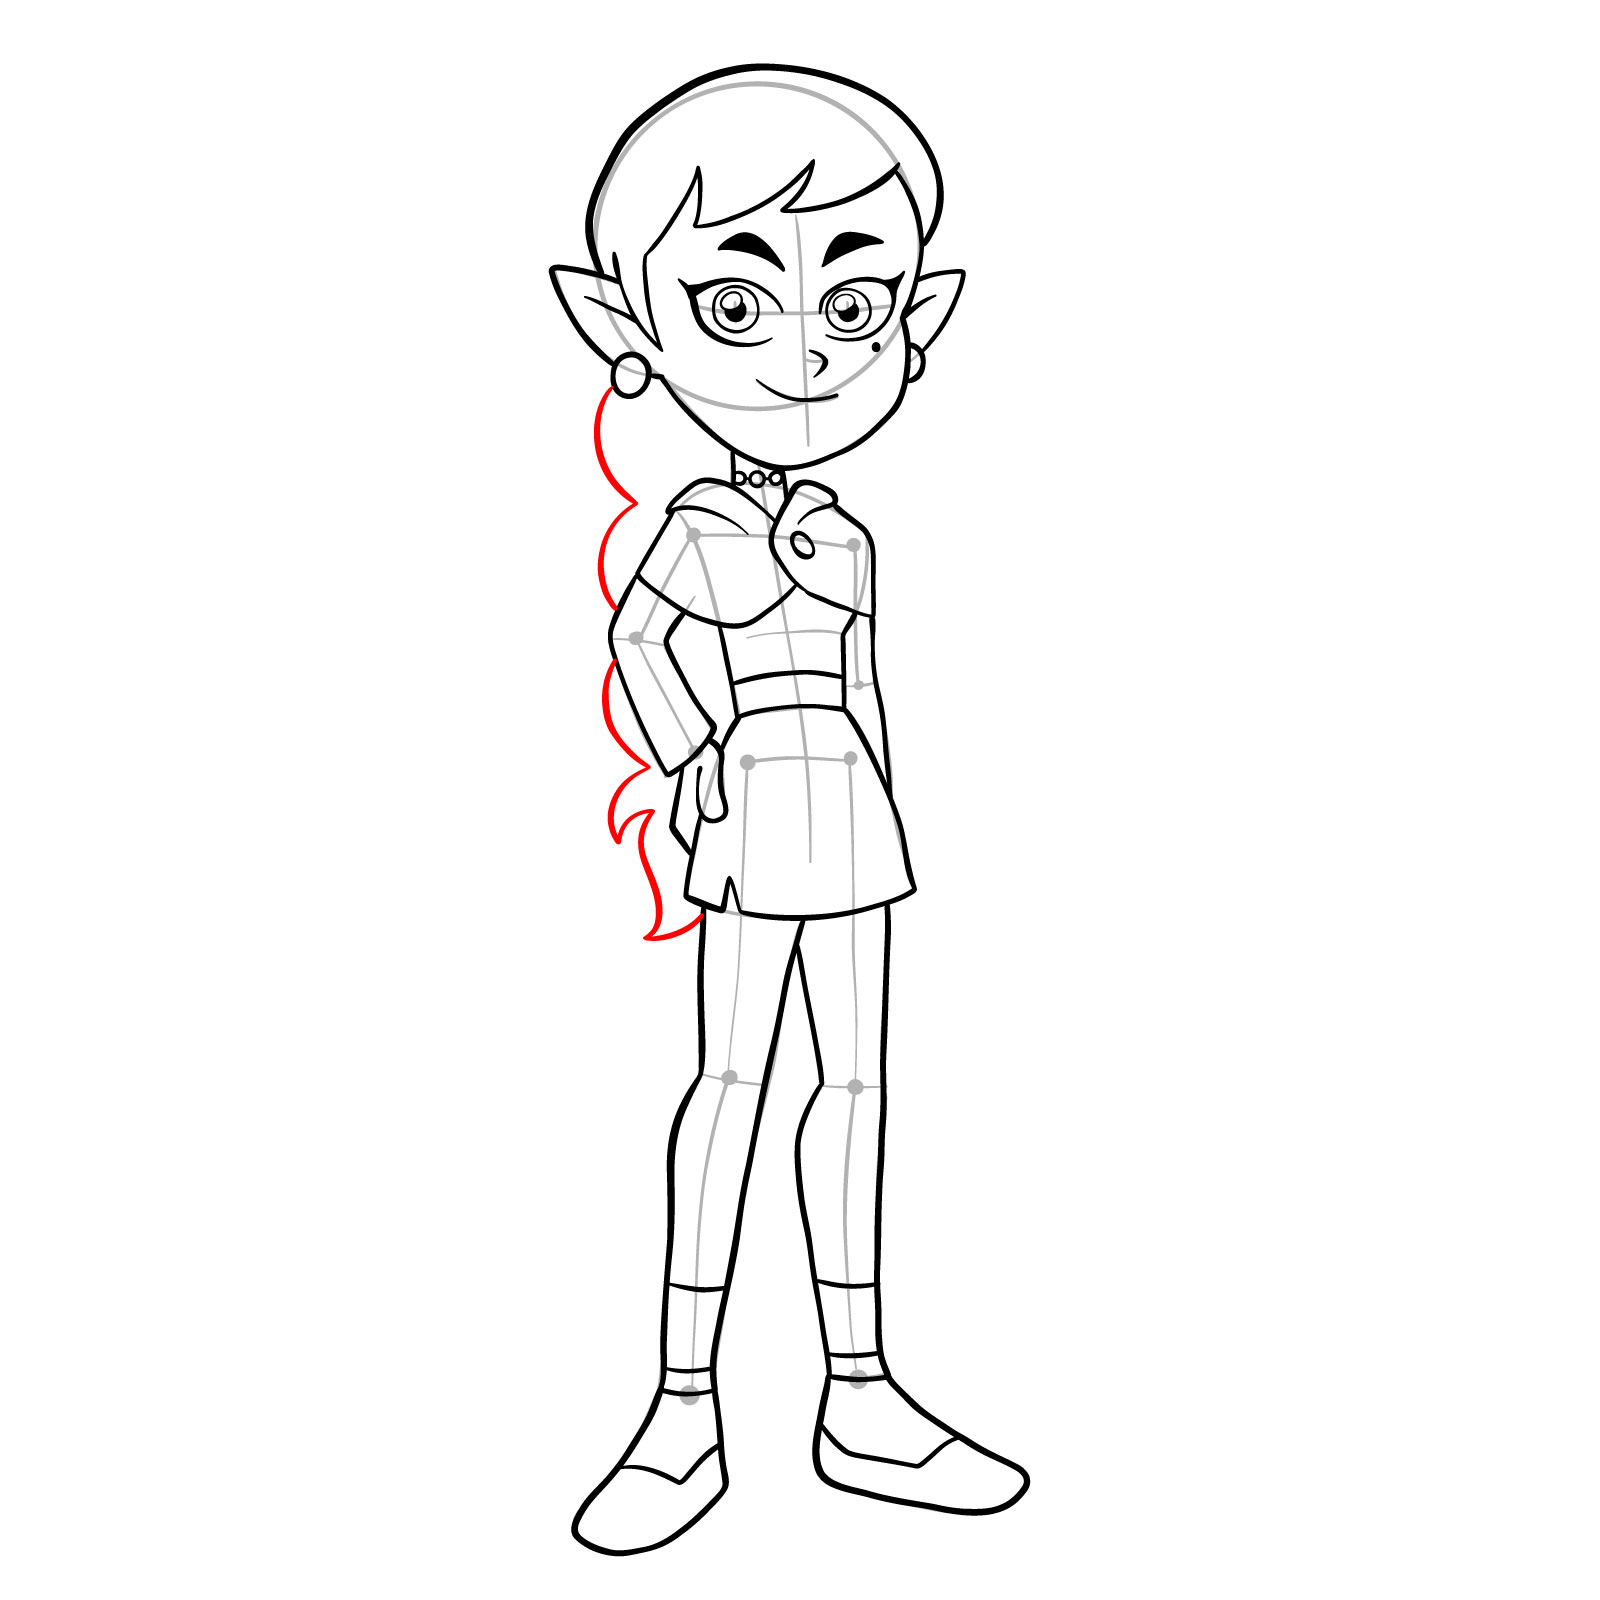 How to draw Emira Blight from The Owl House - step 24